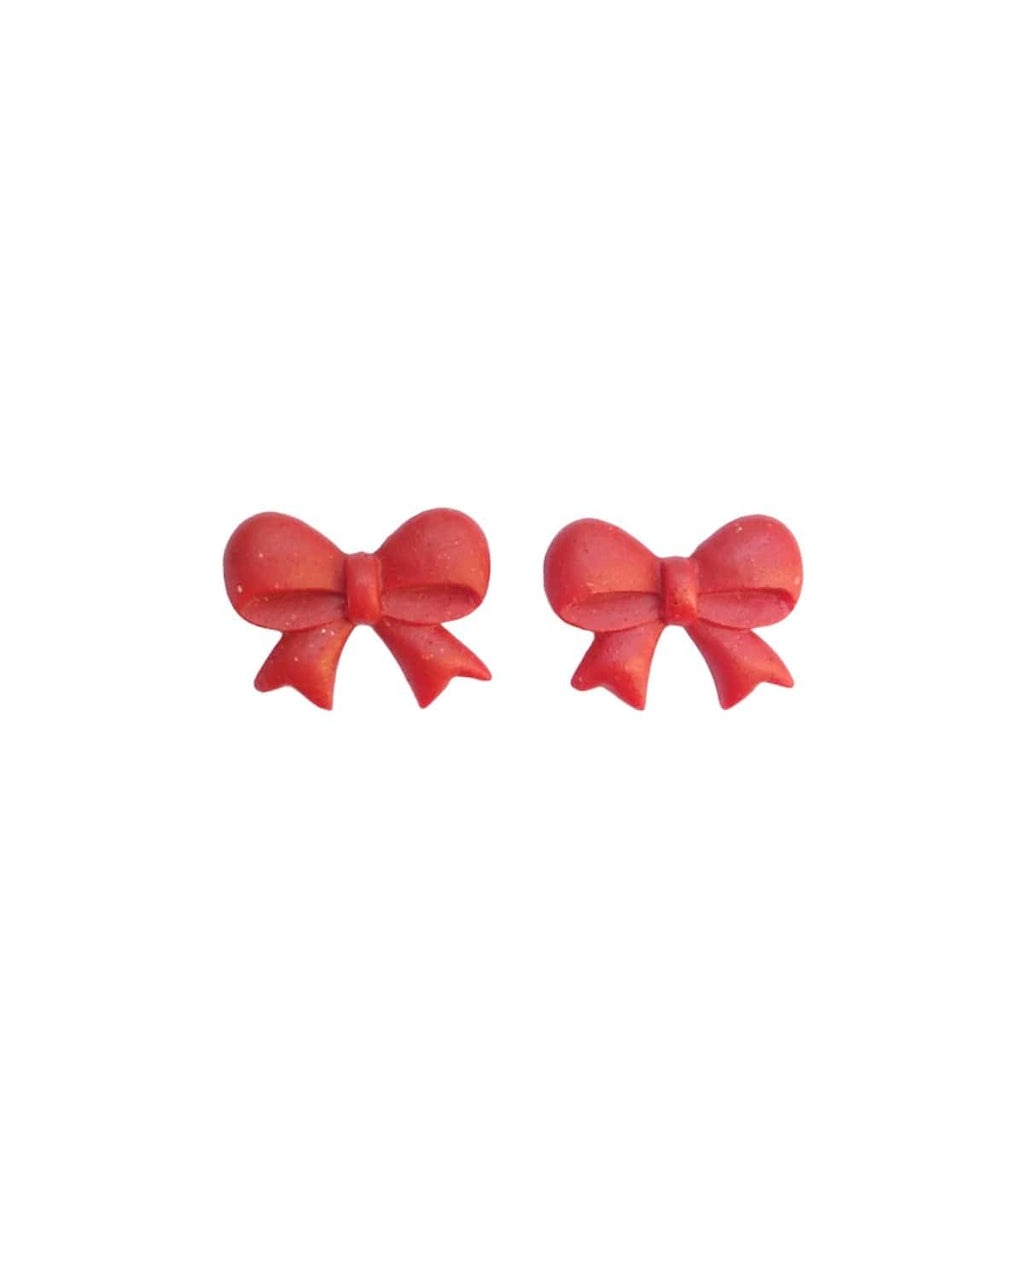 The Red Bow Handmade Stud Earrings - ADSO Creations